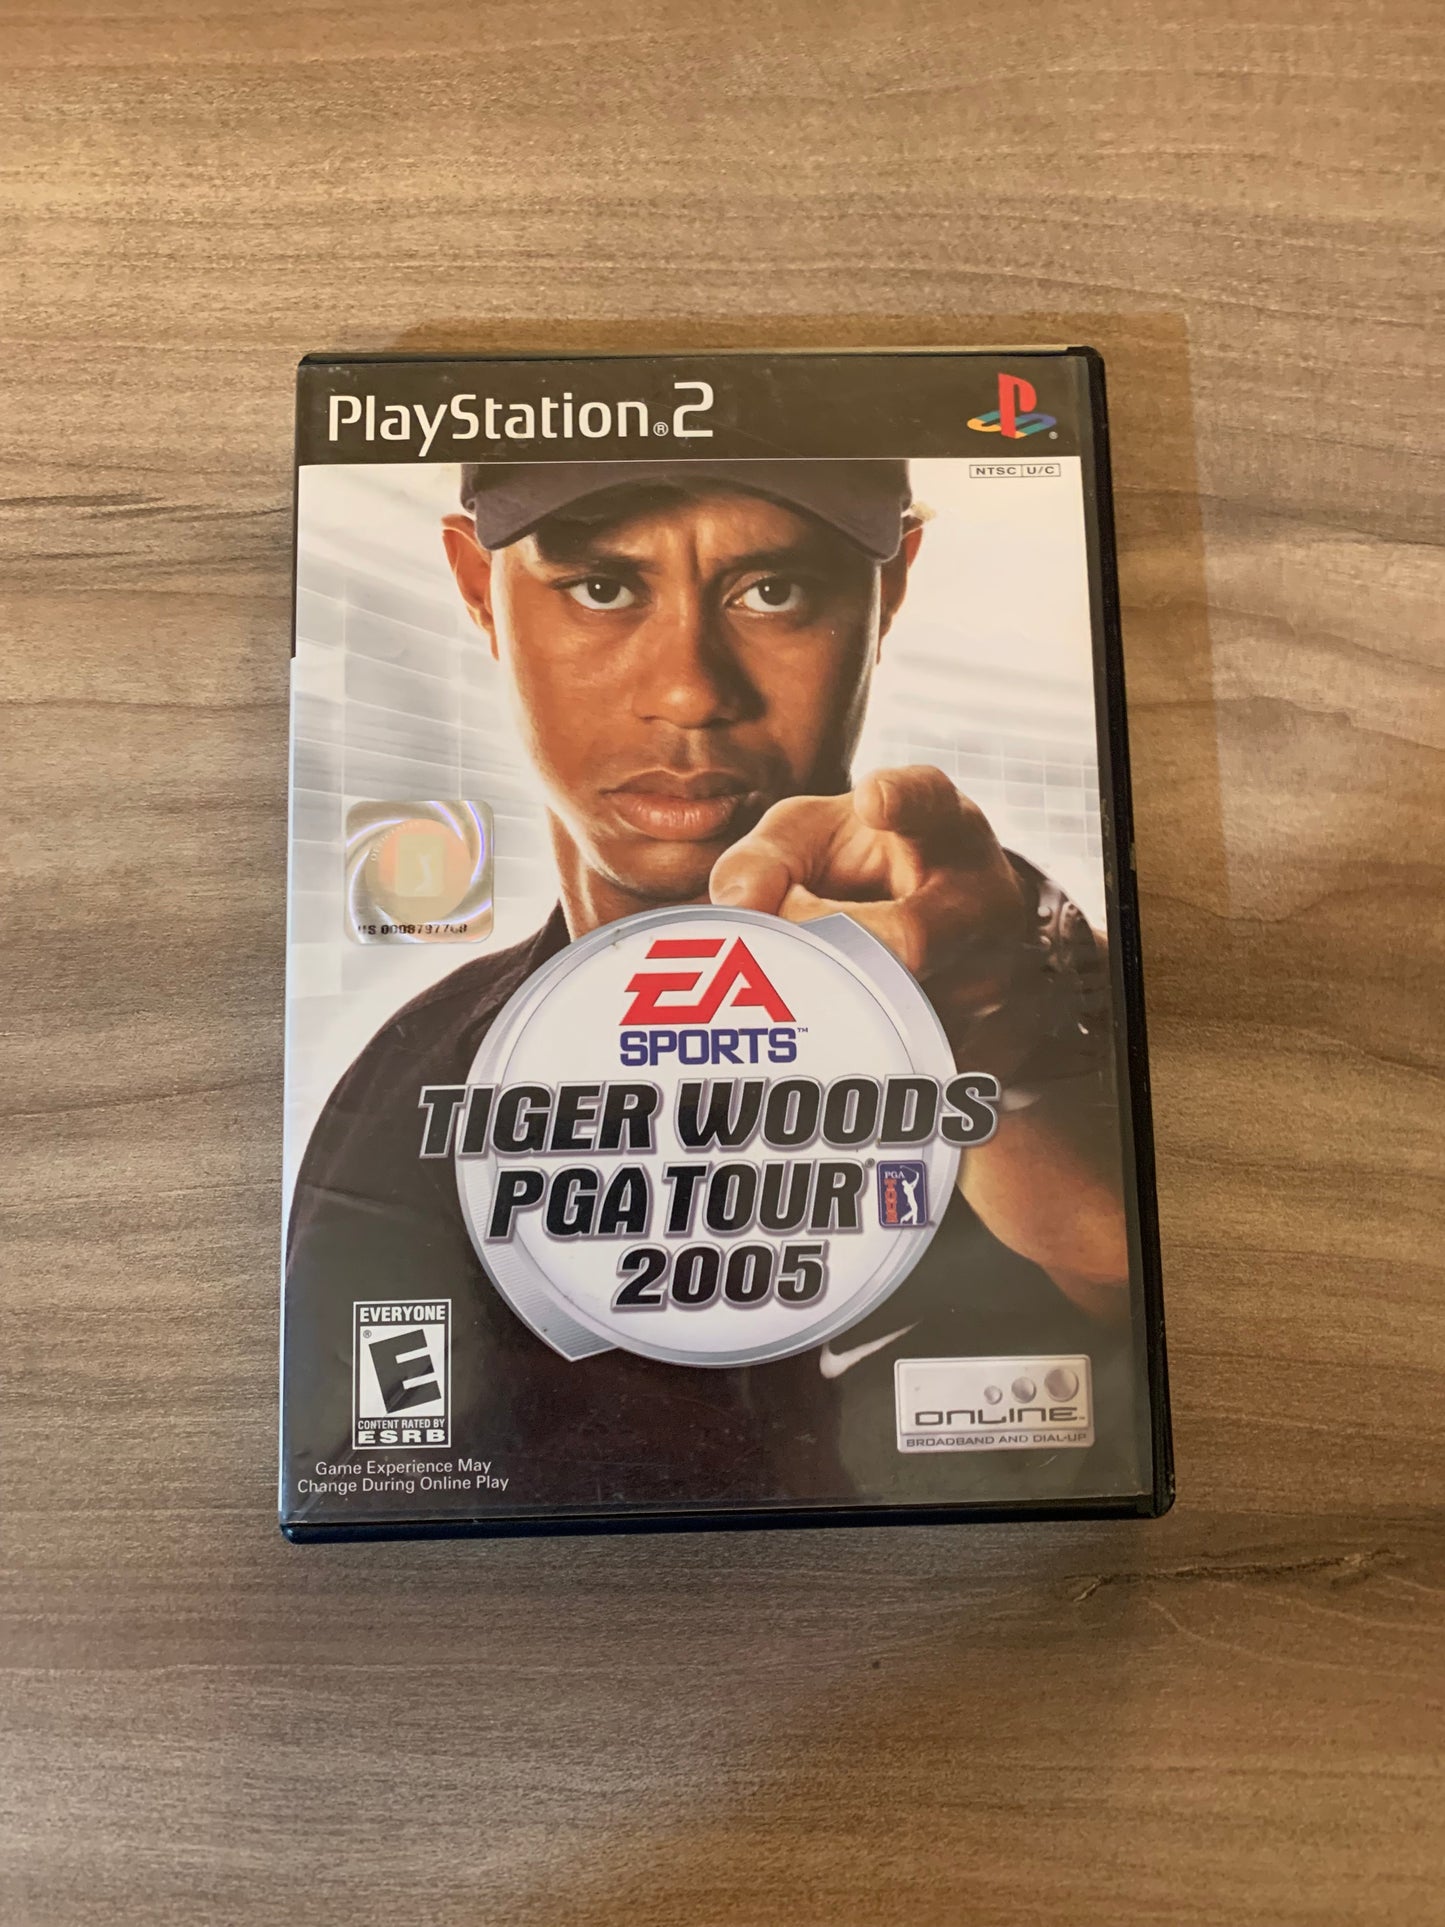 SONY PLAYSTATiON 2 [PS2] | TiGER WOODS PGA TOUR 2005